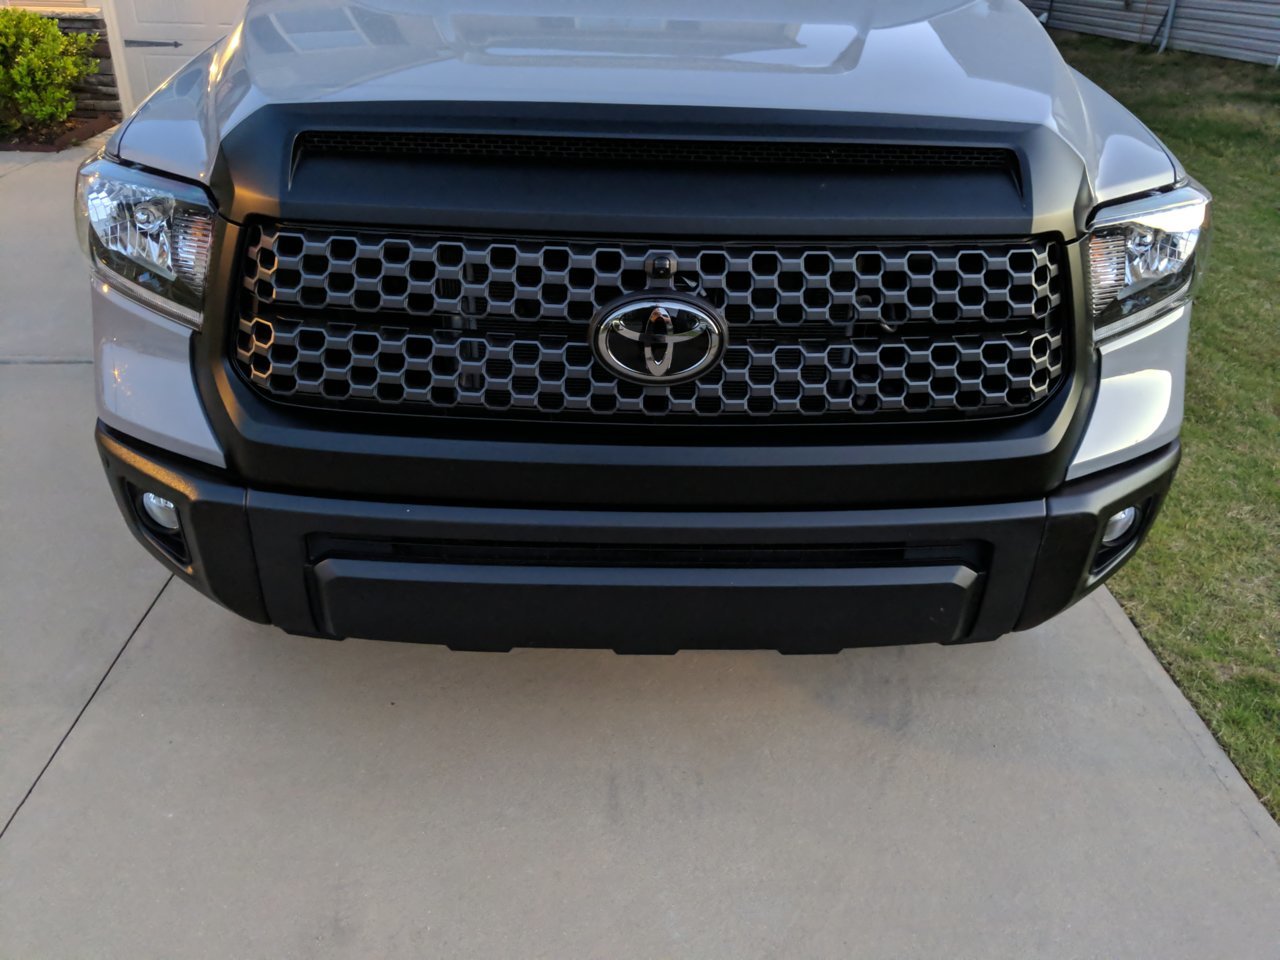 Front grille1.jpg